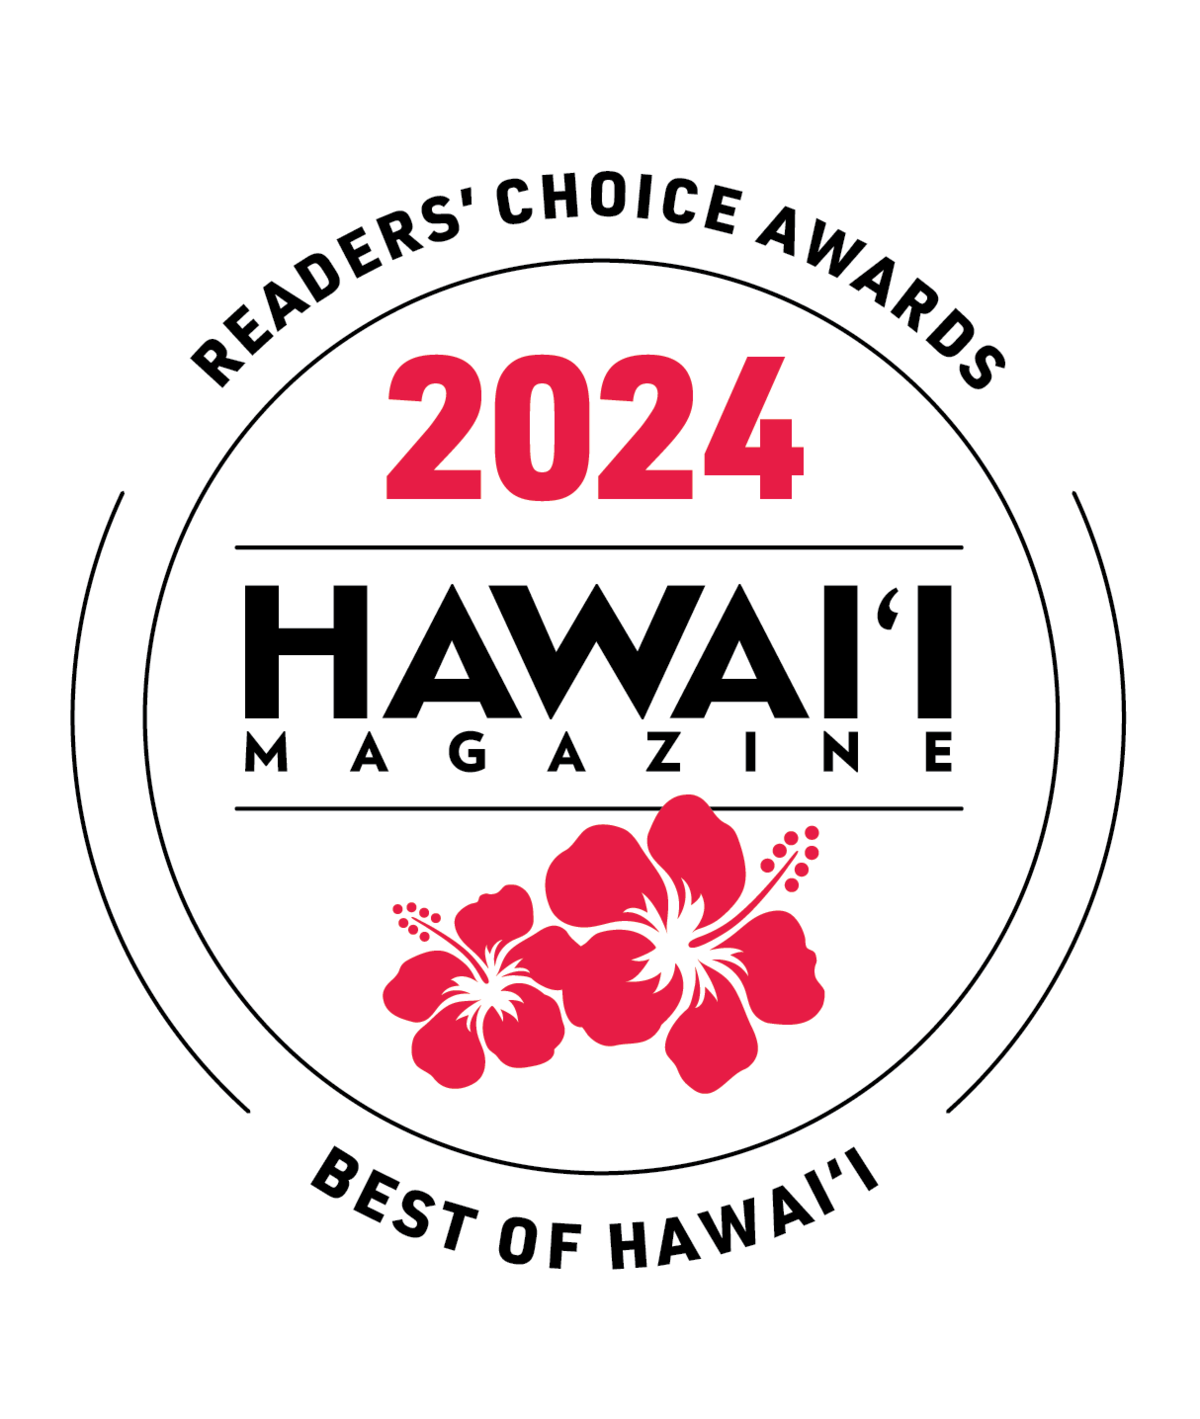 2024 Hawaii Magazine Readers' Choice Awards for Best Value Hotel or Resort